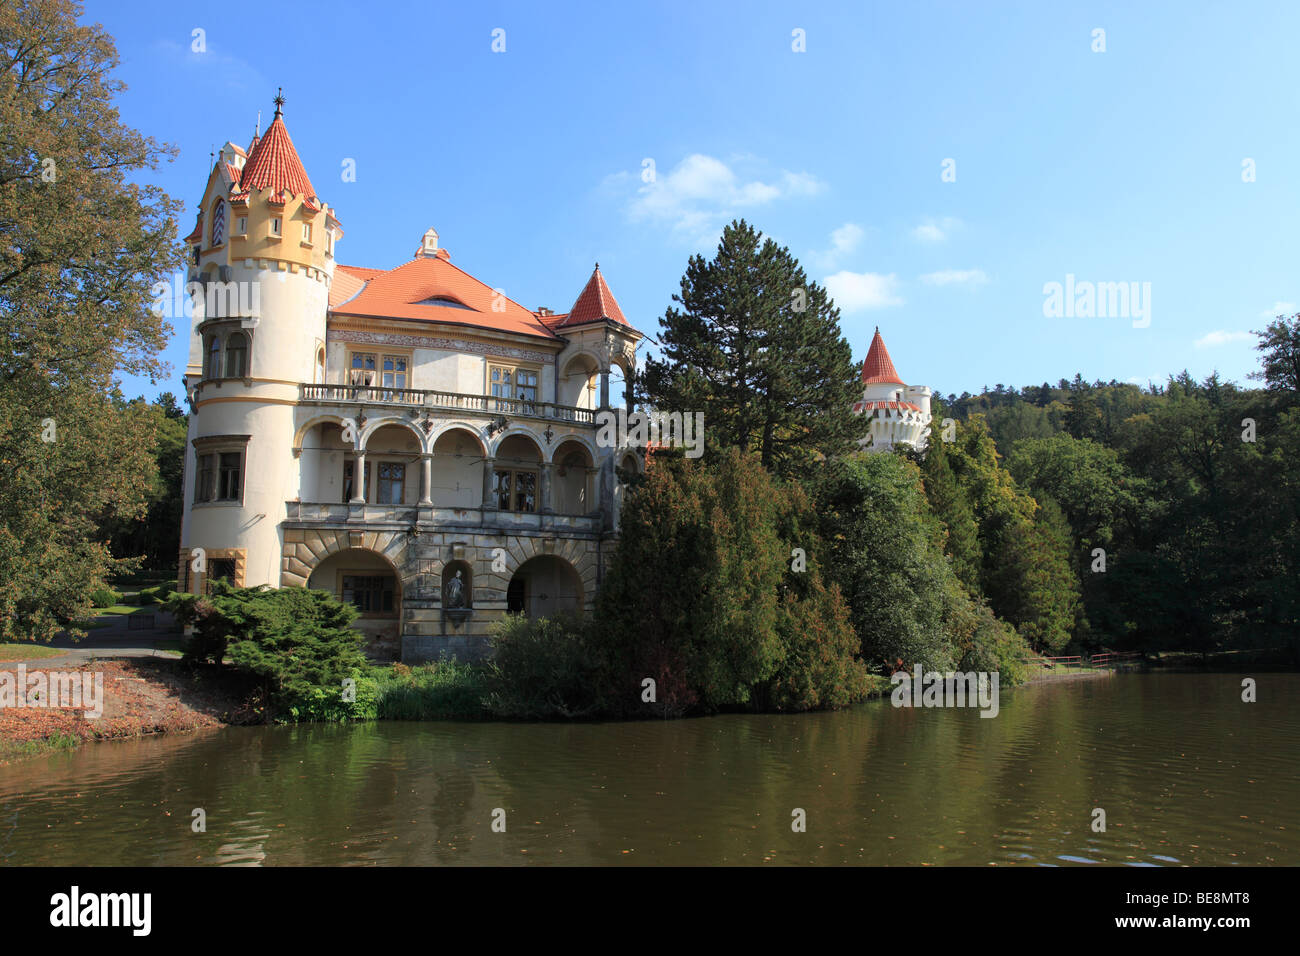 facade of moated castle Zinkovy,  Ceske district of Pilsen, Czech Republic, Europe. Photo by Willy Matheisl Stock Photo